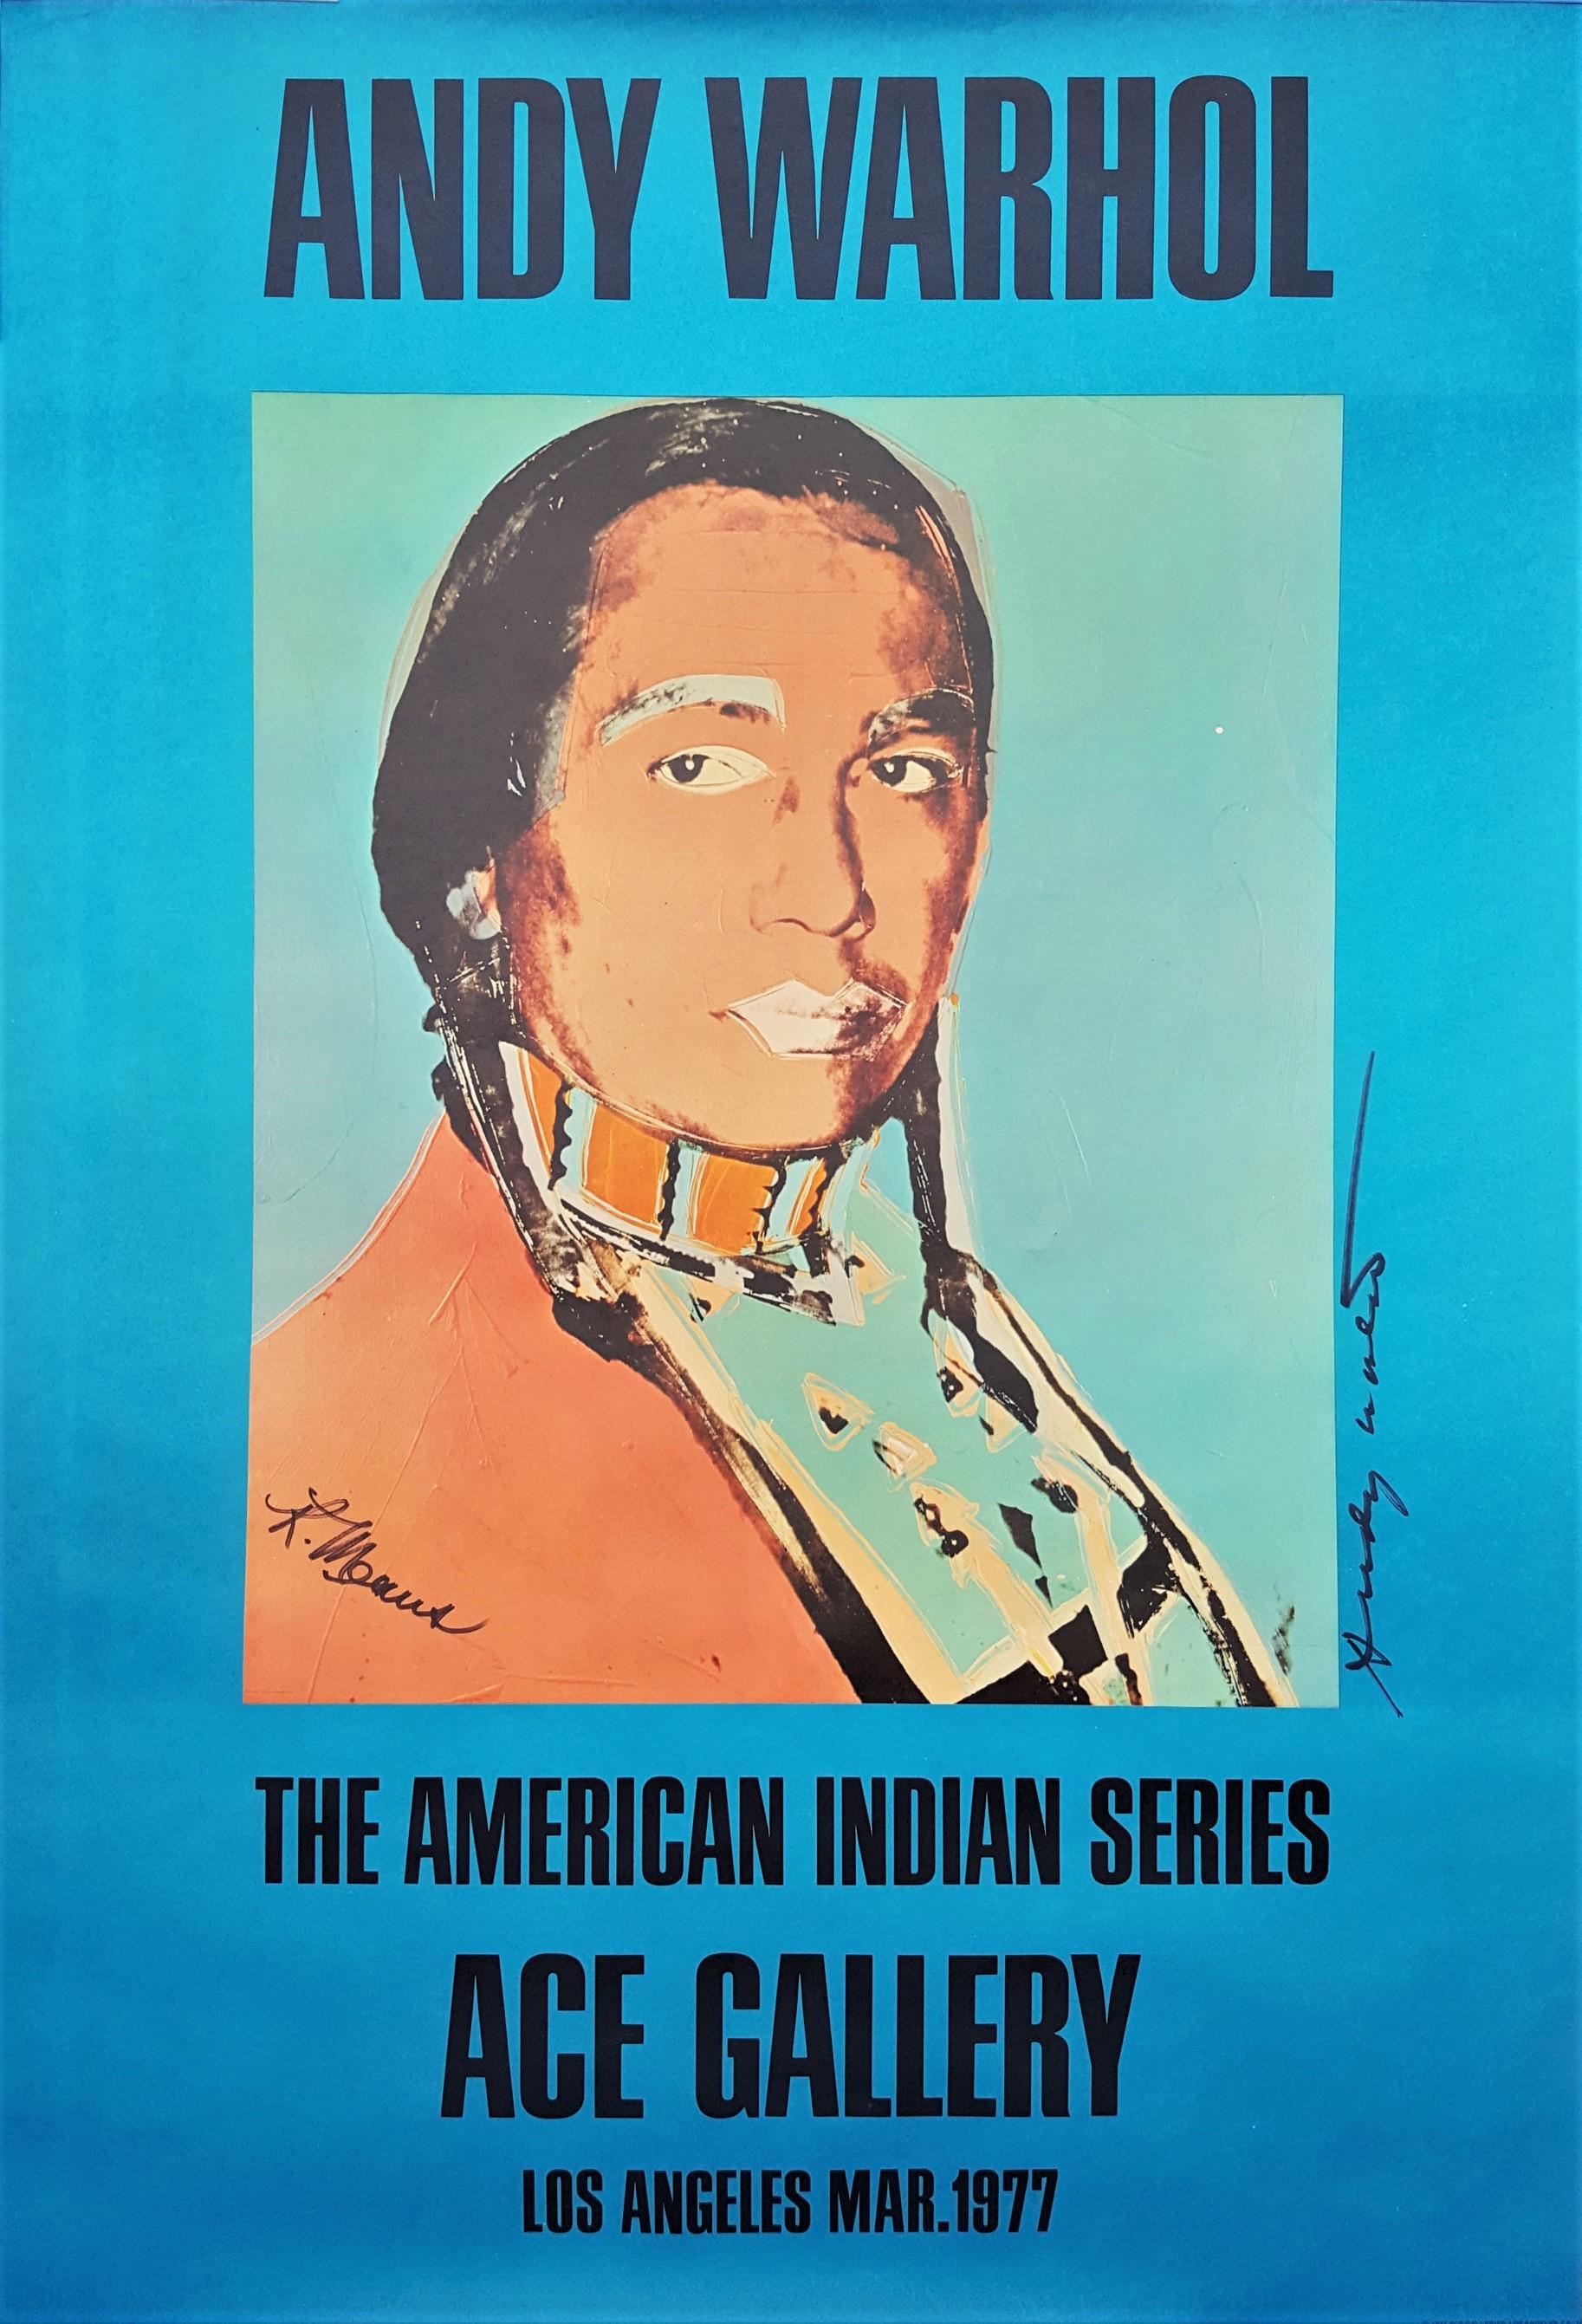 Andy Warhol Portrait Print - The American Indian Series: Ace Gallery (Double Signed)